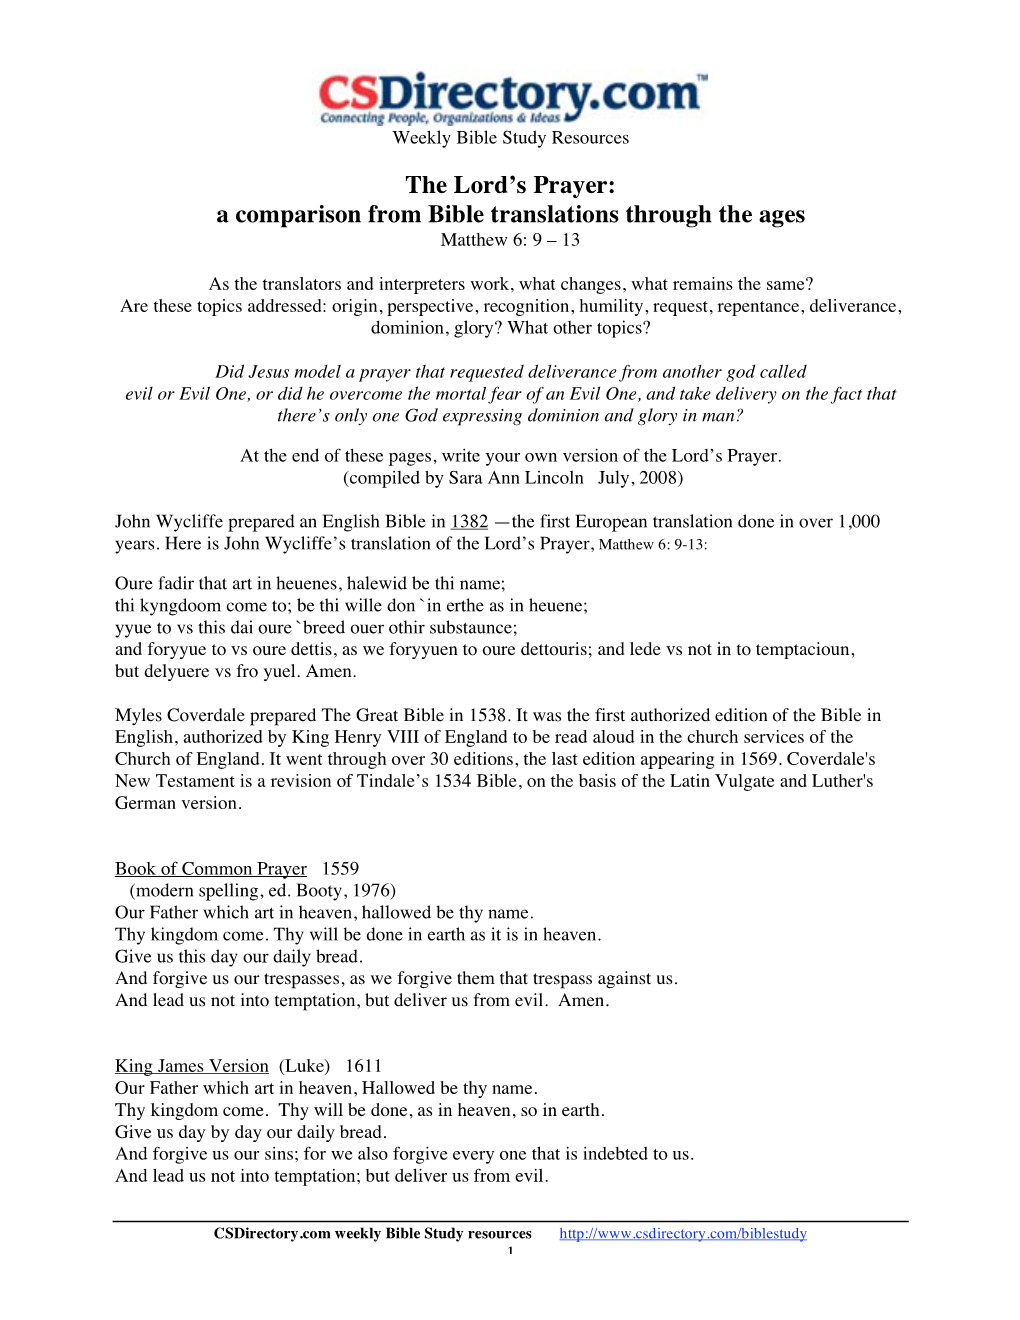 The Lord's Prayer: a Comparison from Bible Translations Through the Ages